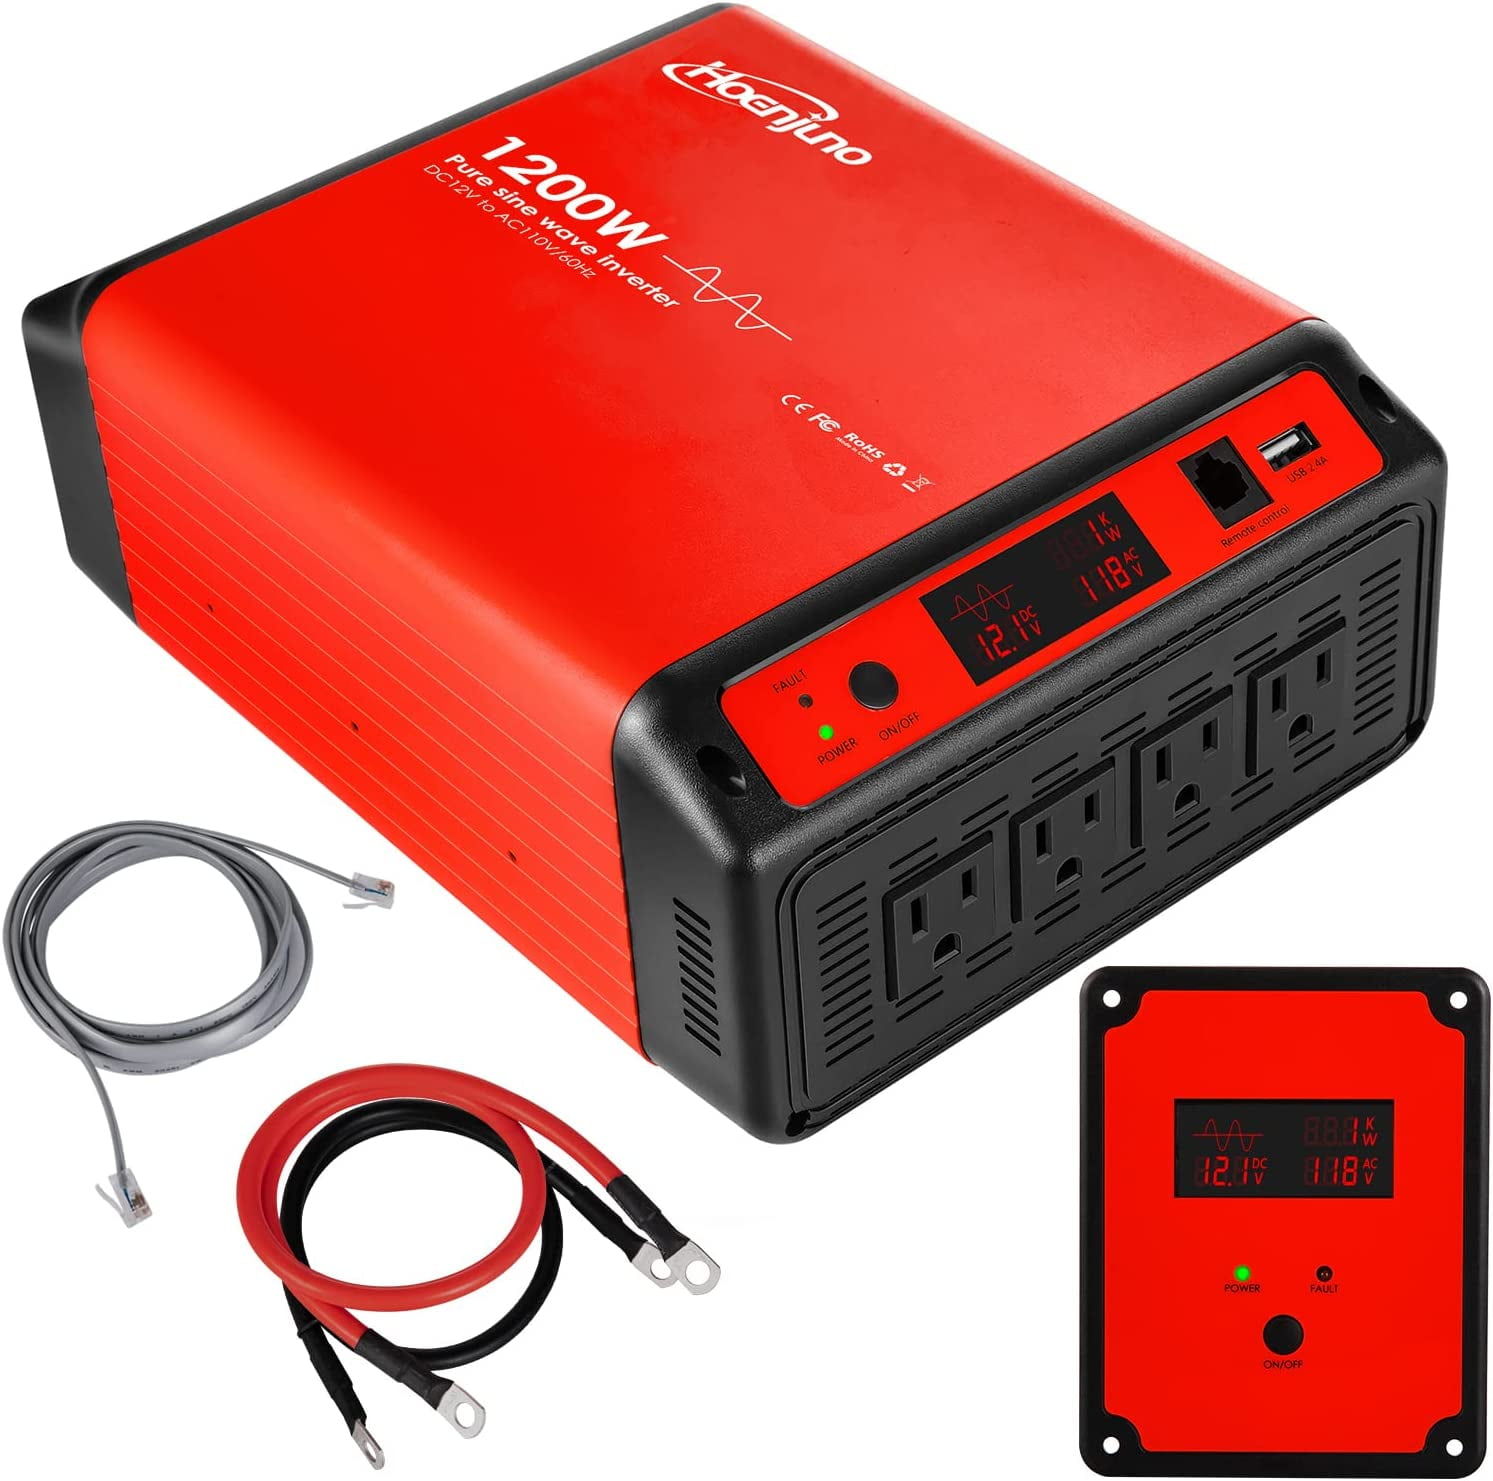 Hoenjuno 1200W Pure Sine Wave Inverter Power Converter DC 12V to AC 110V  Power Source with 15 Feet Remote Control Cable Red 